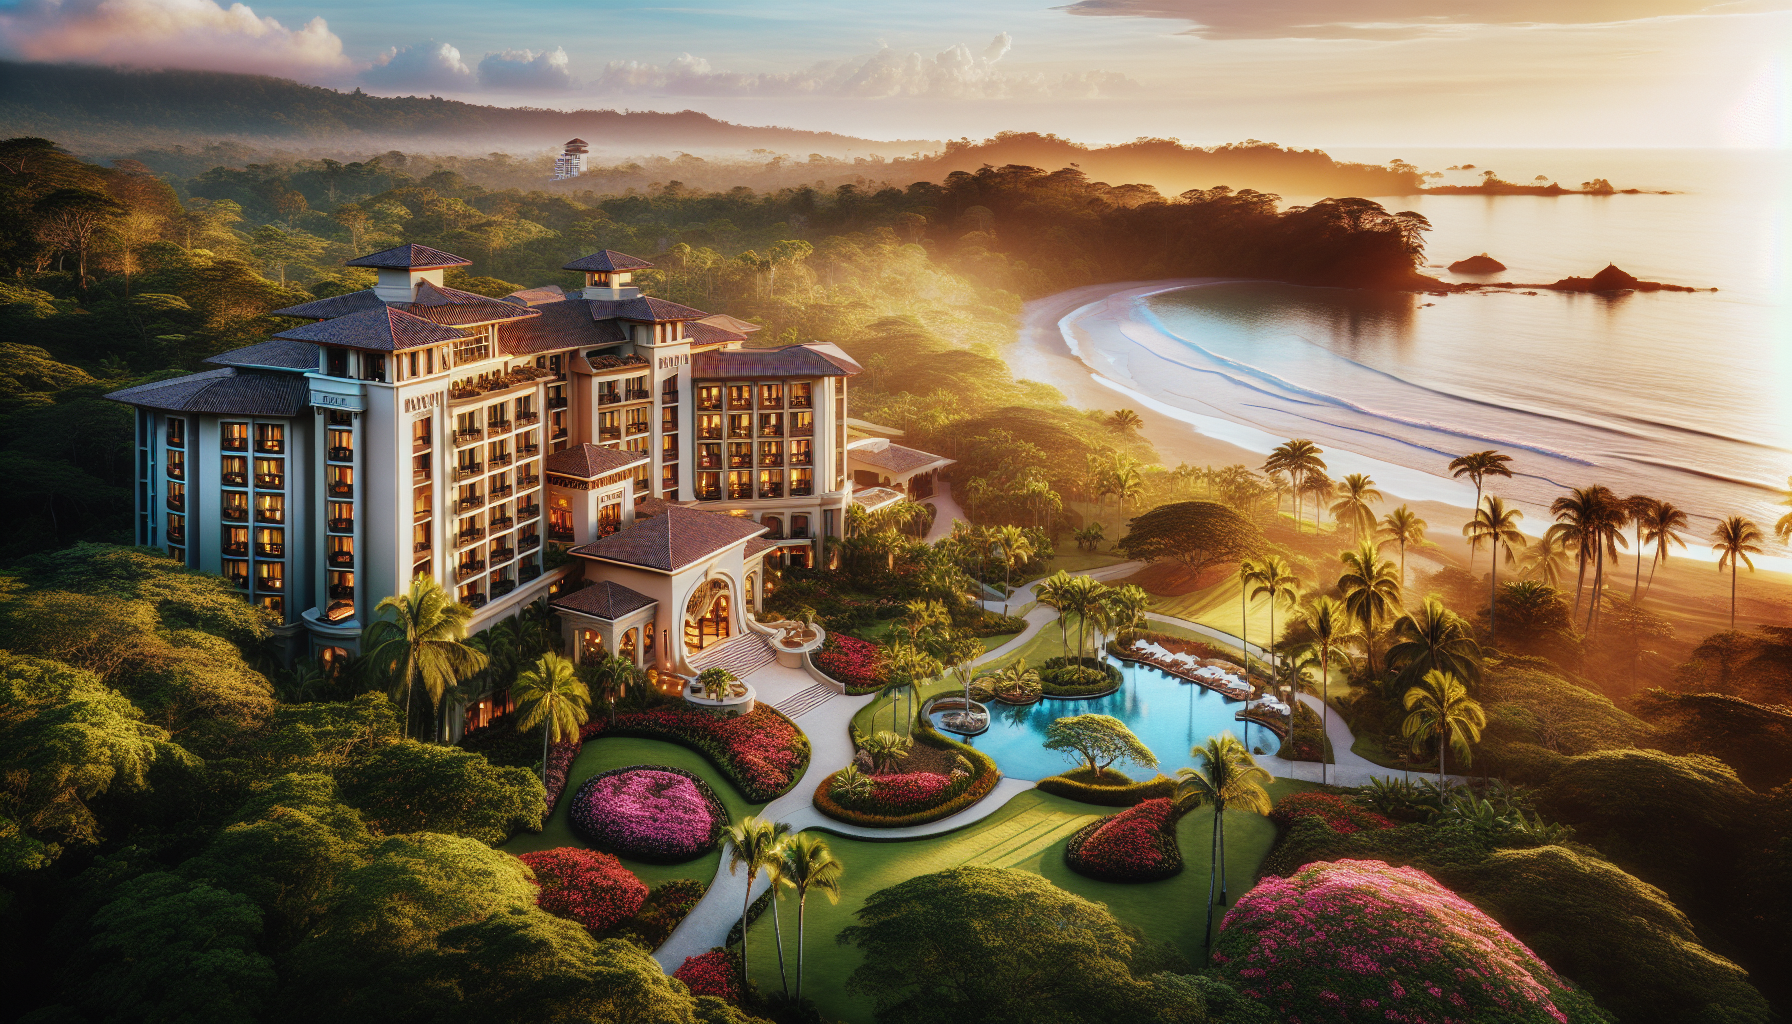 Luxurious JW Marriott Costa Rica Resort & Spa surrounded by tropical gardens and Mansita Beach